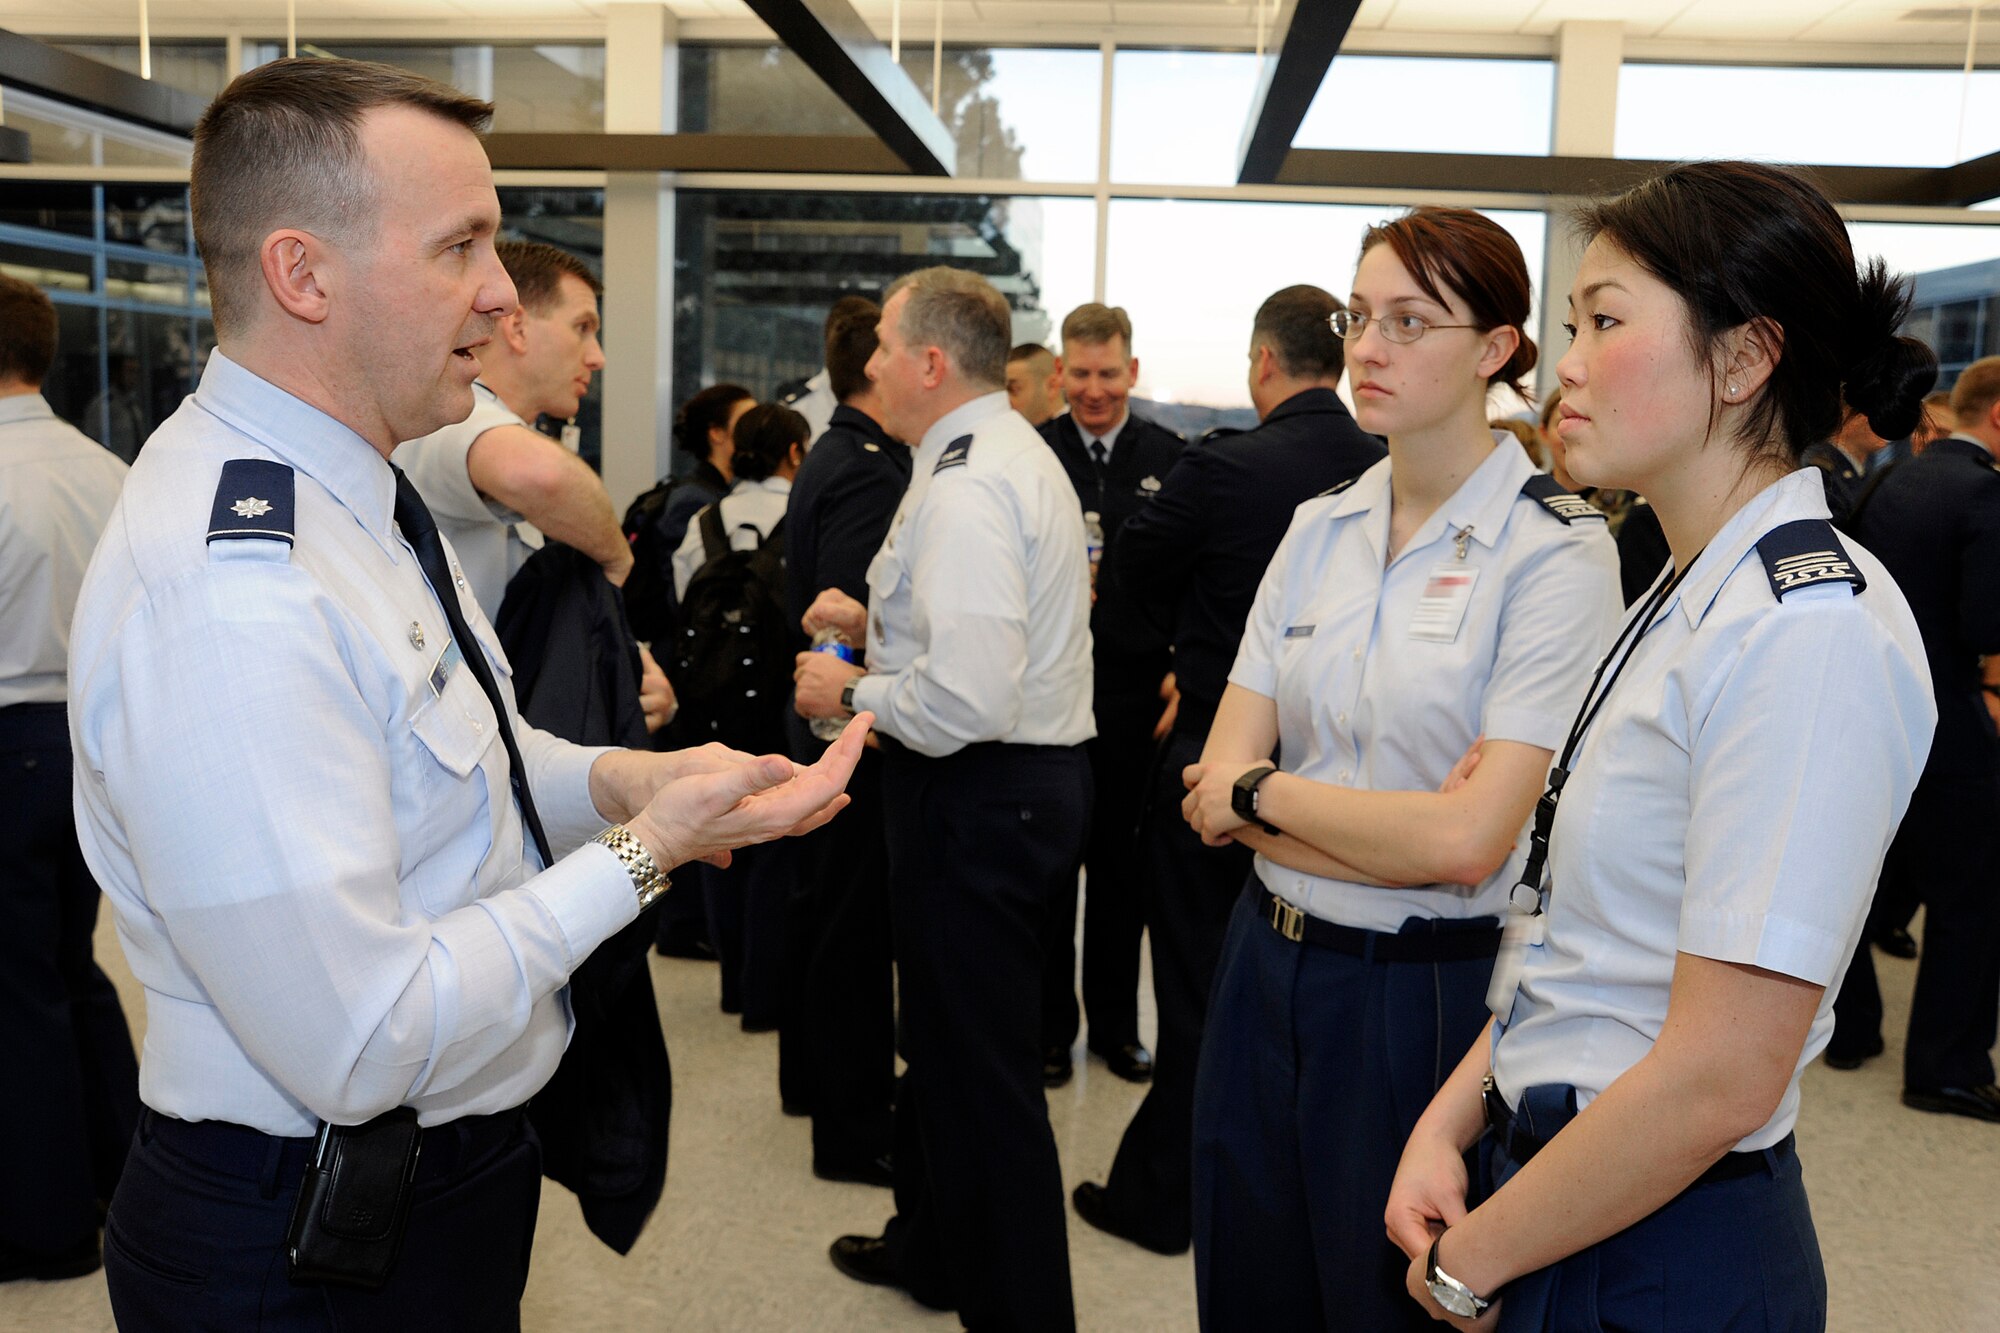 Lt. Col. Donald Lewis speaks with Cadets 1st Class Lucy McMinn and Julie Song following a cyberspace career panel at the Air Force Academy in Colorado Springs, Colo., Jan. 11, 2010. Colonel Lewis is commander of the 690th Network Services Squadron at Vandenberg Air Force Base, Calif. Cadets McMinn and Song are assigned to Cadet Squadrons 01 and 13. (U.S. Air Force photo/Mike Kaplan)